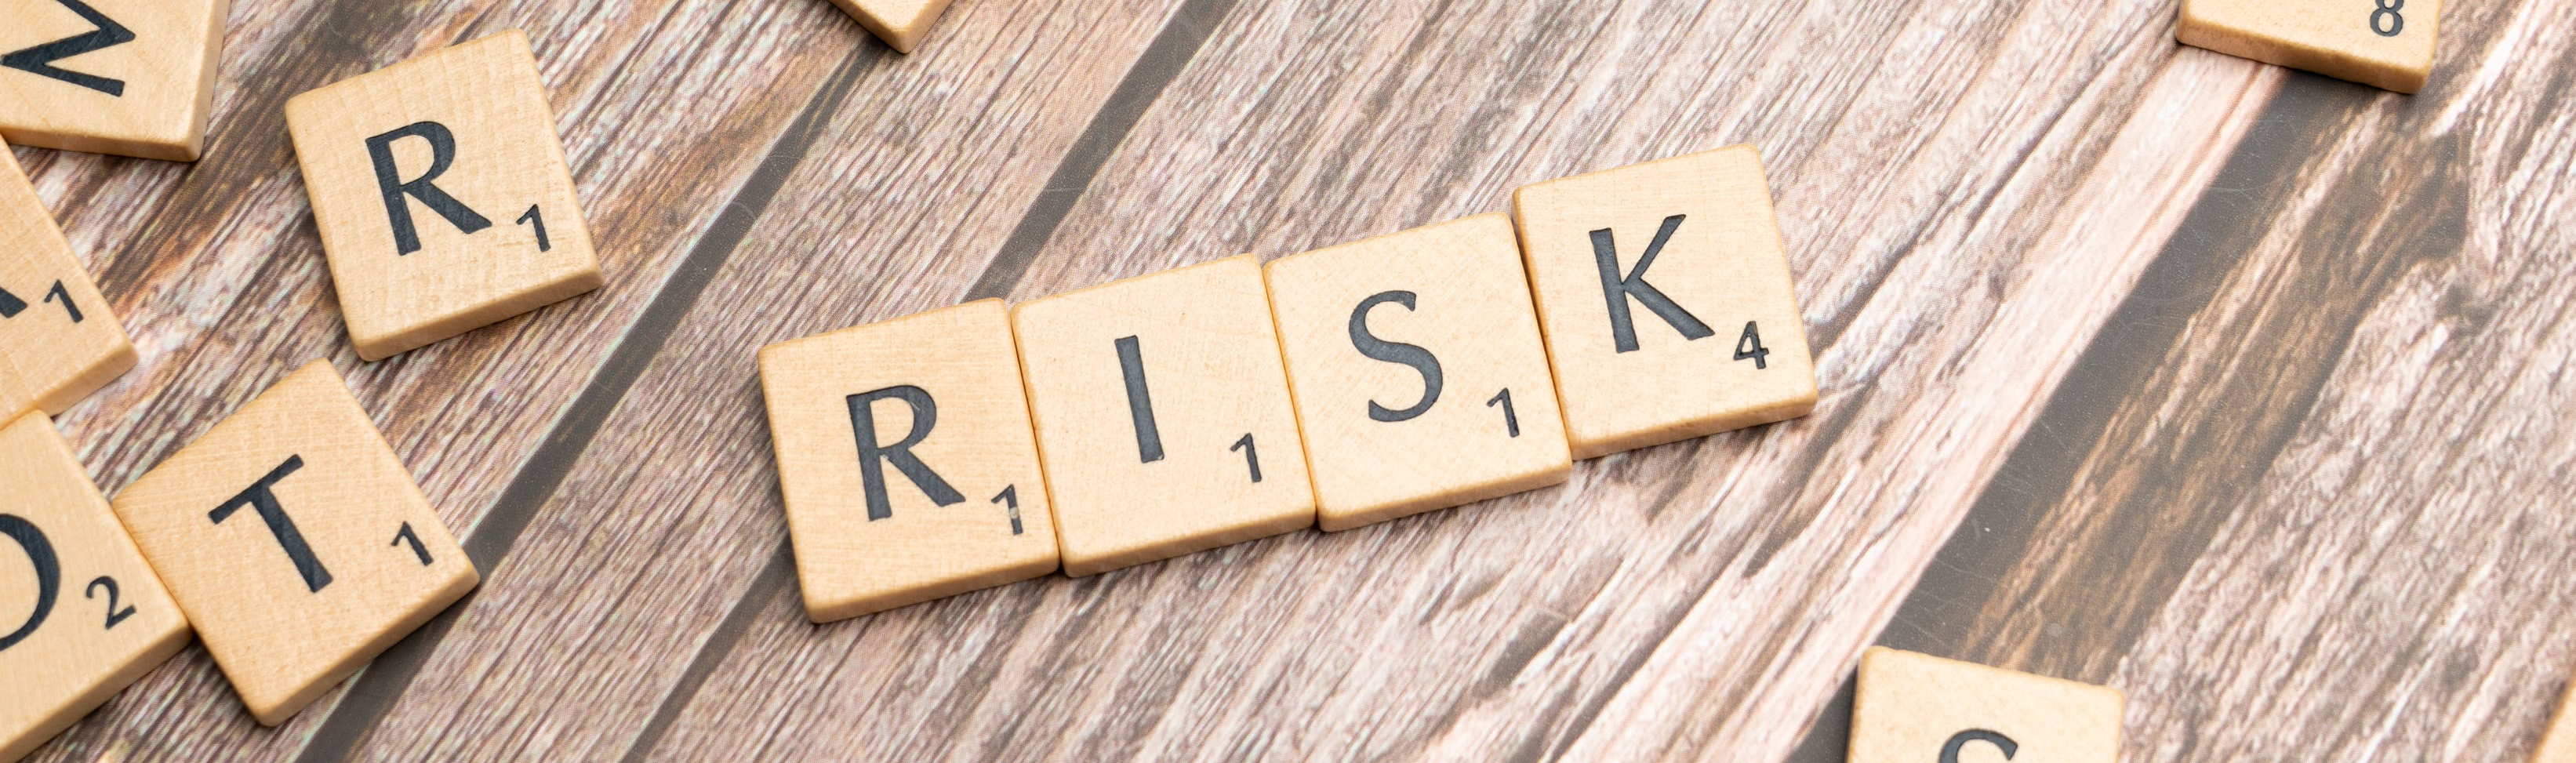 Scrabble tiles spelling out the word Risk